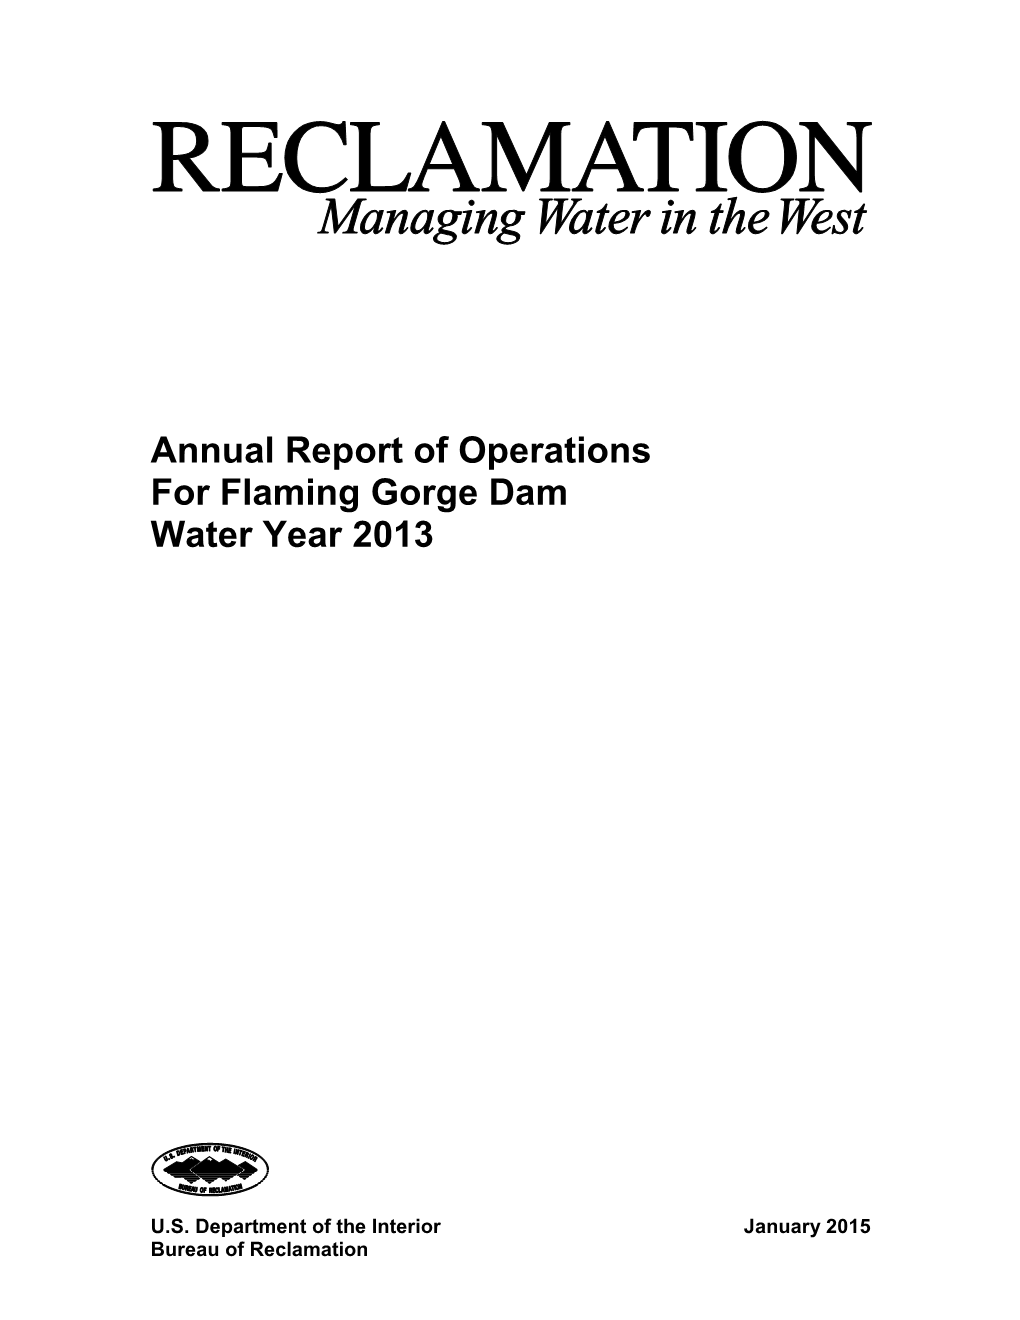 Annual Report of Operations for Flaming Gorge Dam Water Year 2013